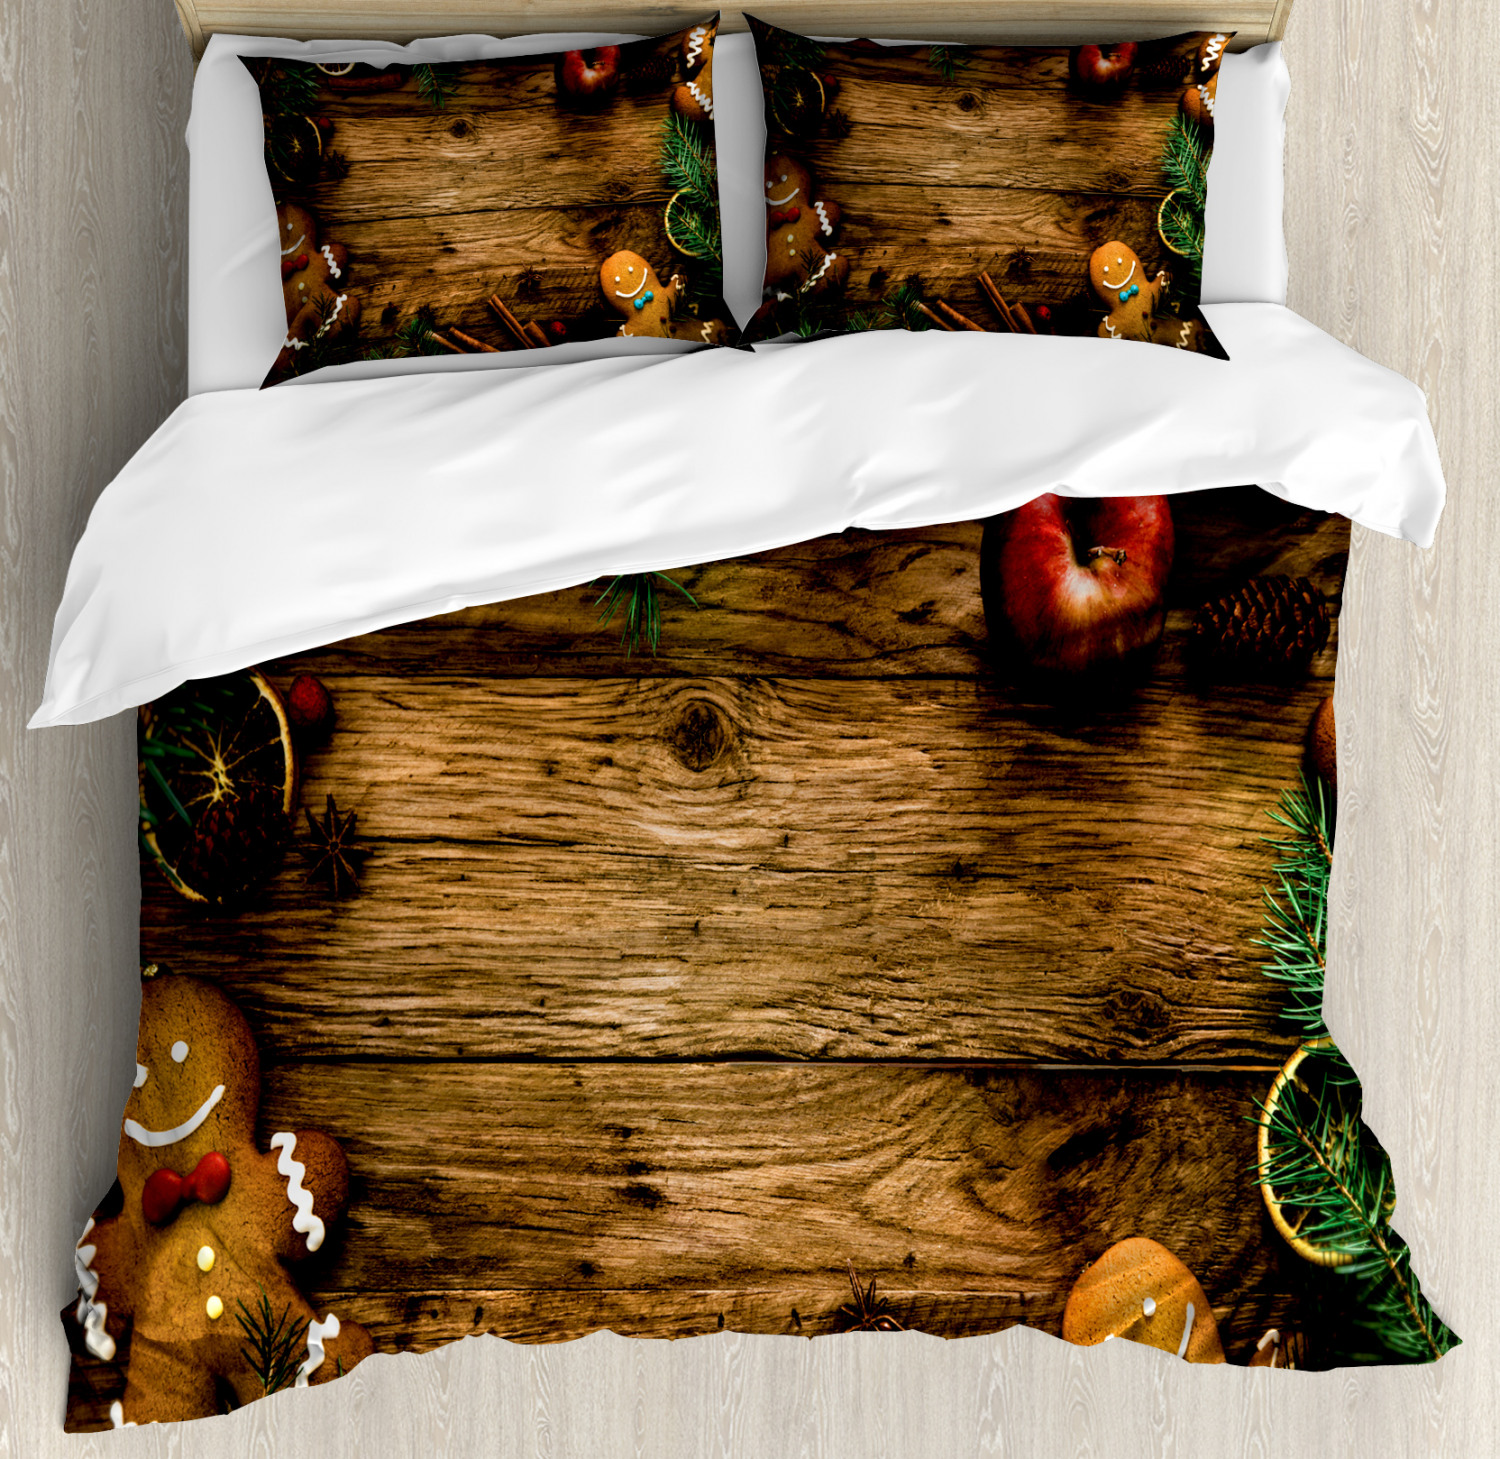 Christmas Duvet Cover Set With Pillow Shams Rustic Lodge Wood